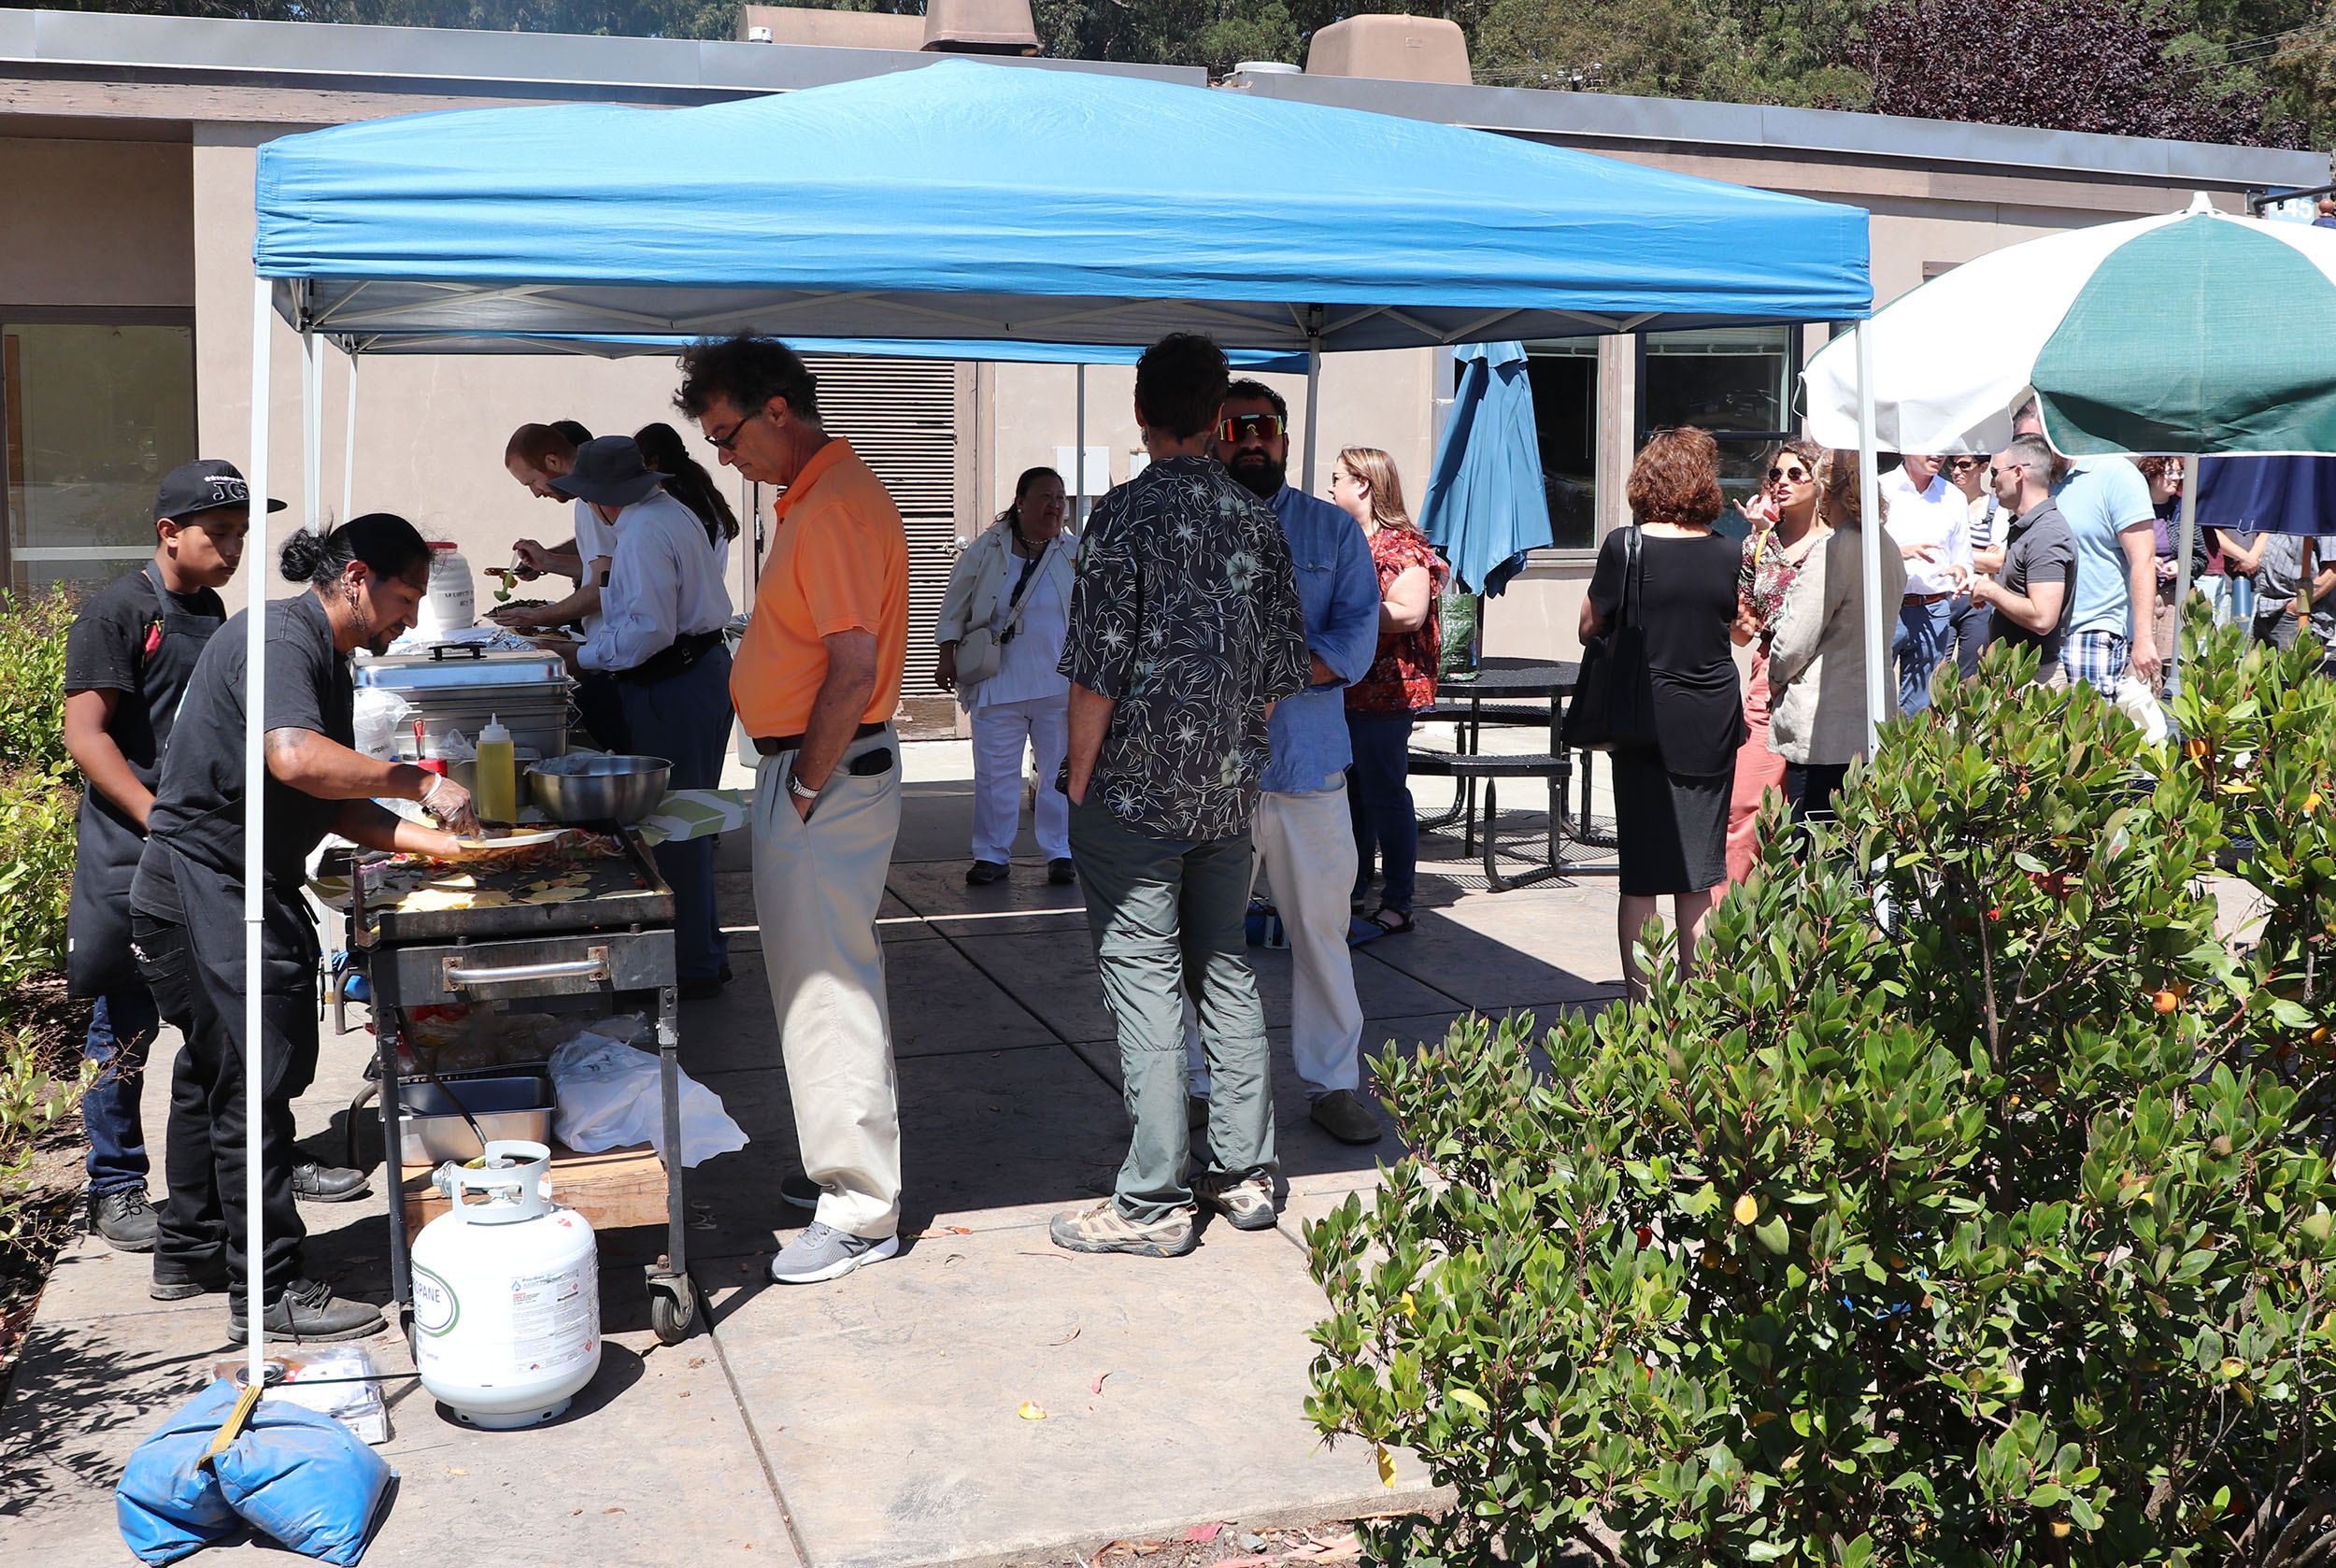 ITS Berkeley and Center staff came together to celebrate award winners with an end of summer lunch